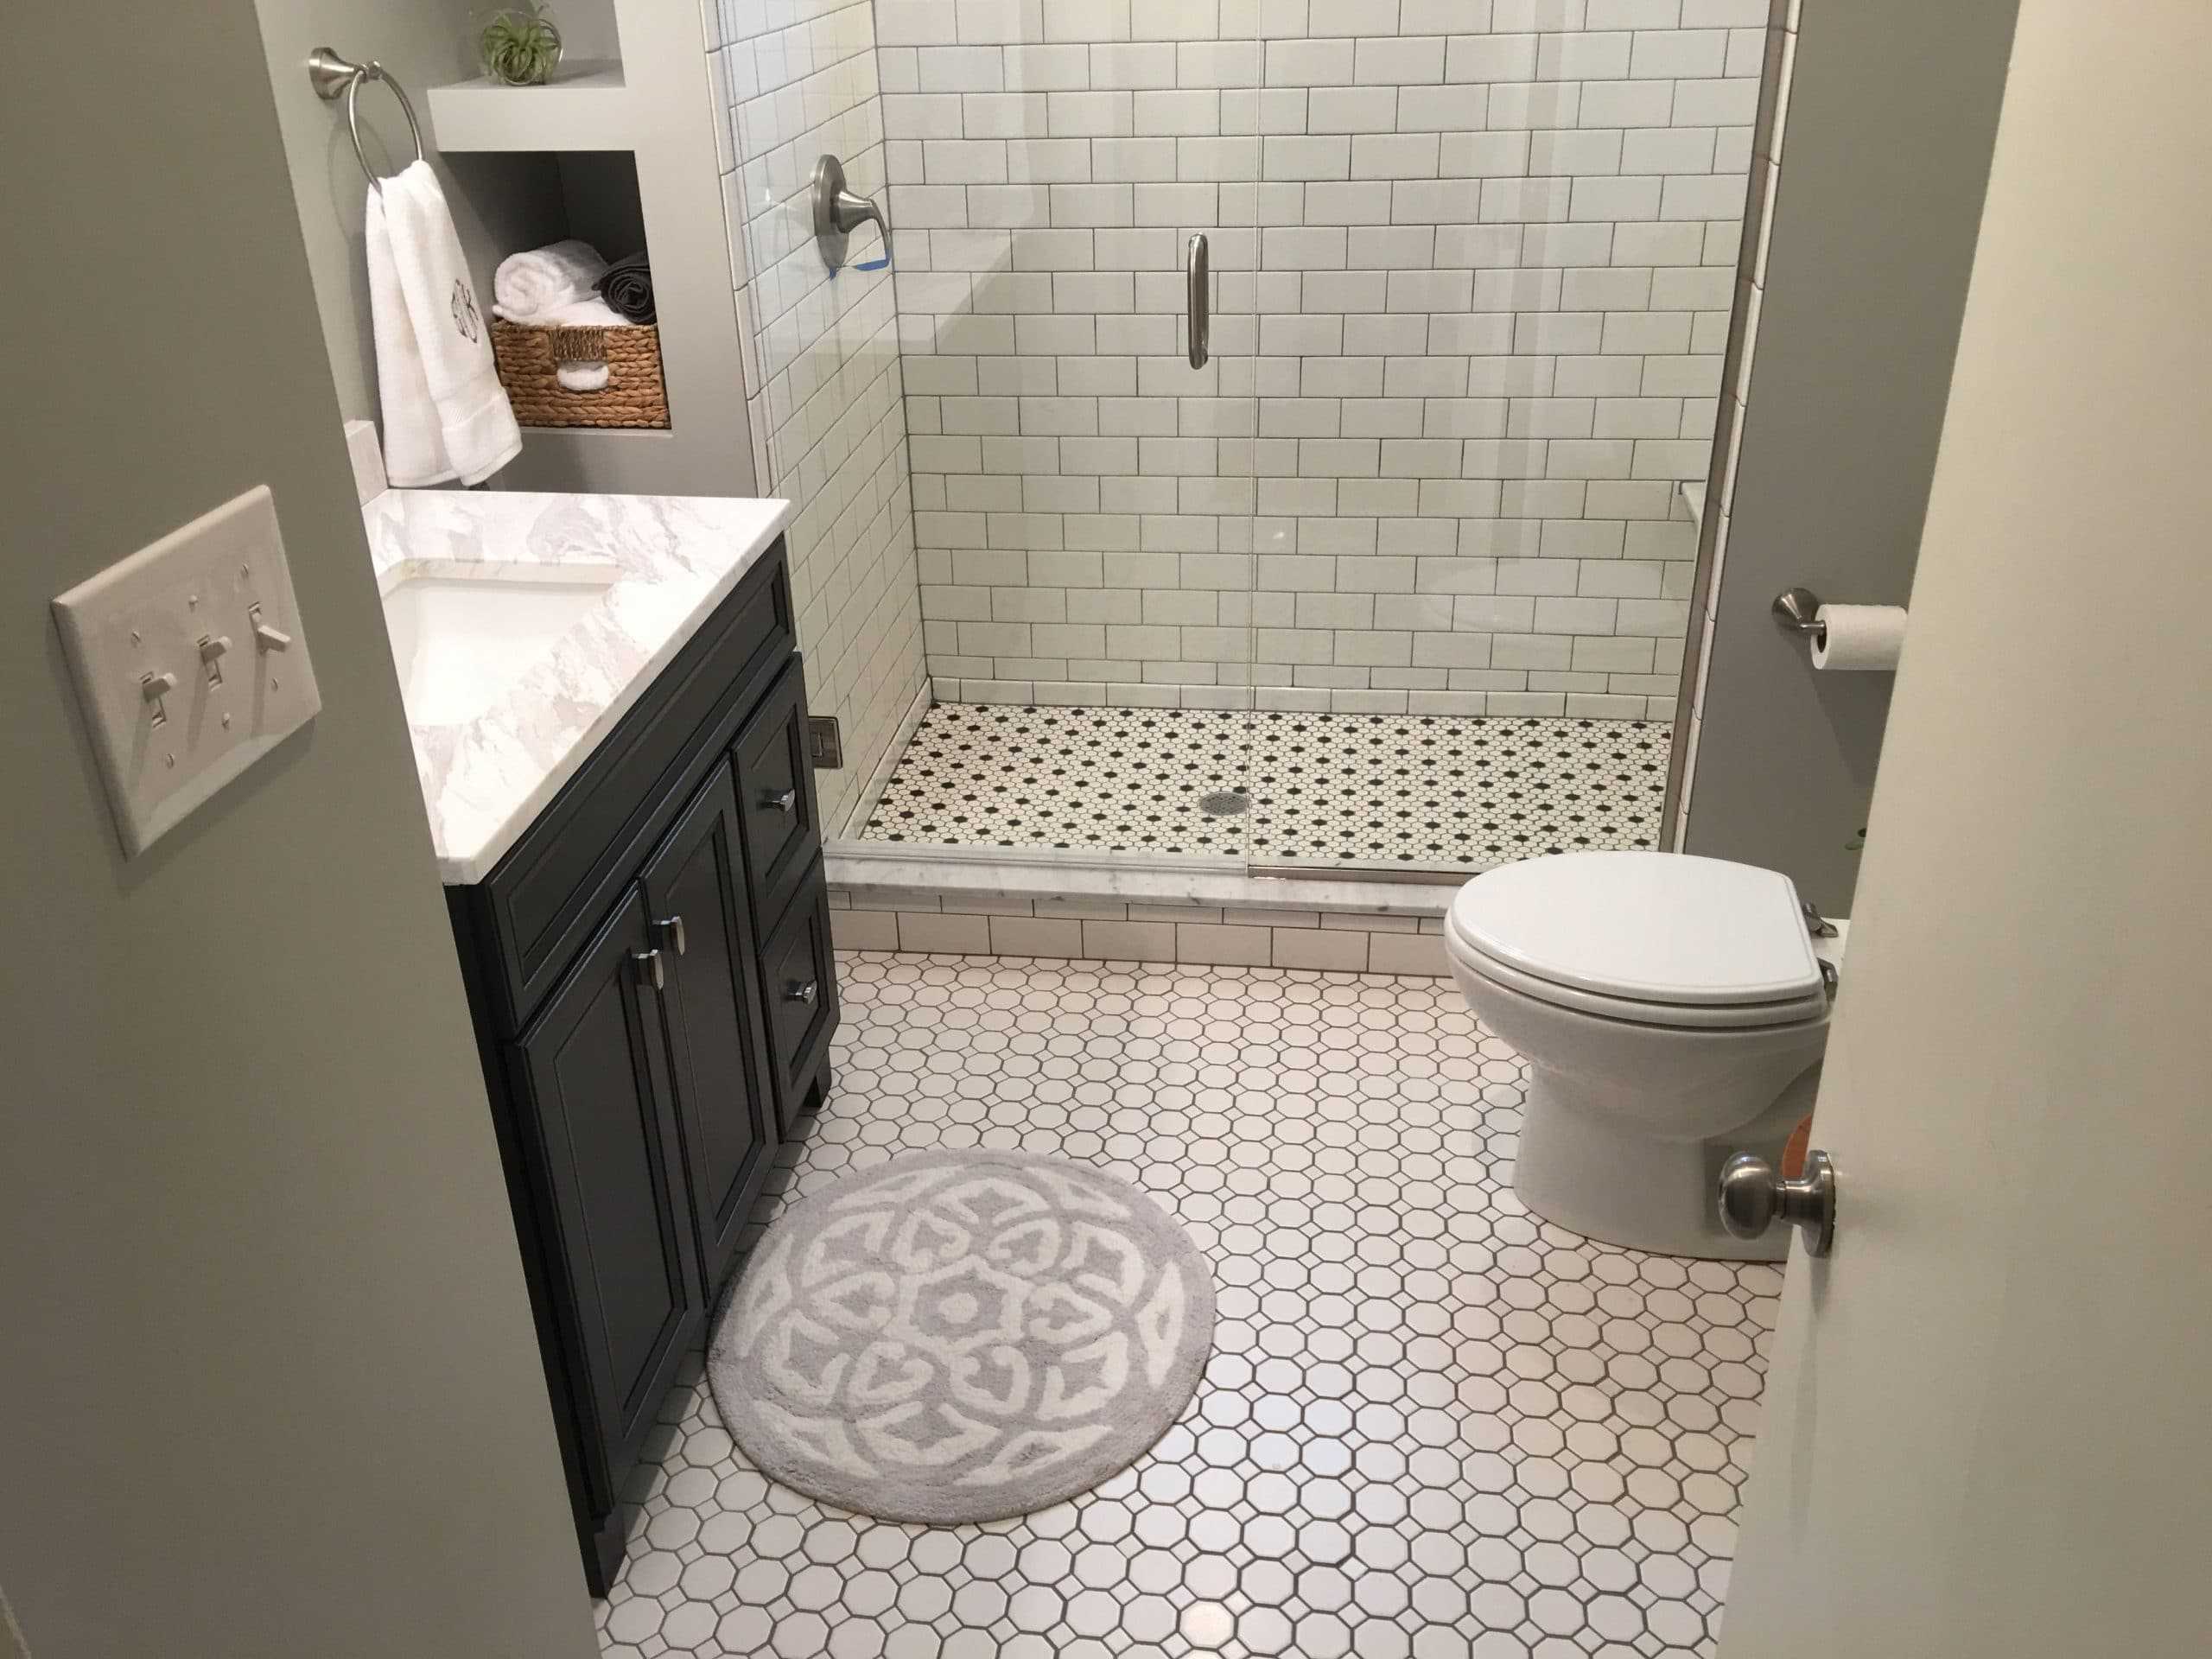 Bathroom with tile floor and tile shower enclosure